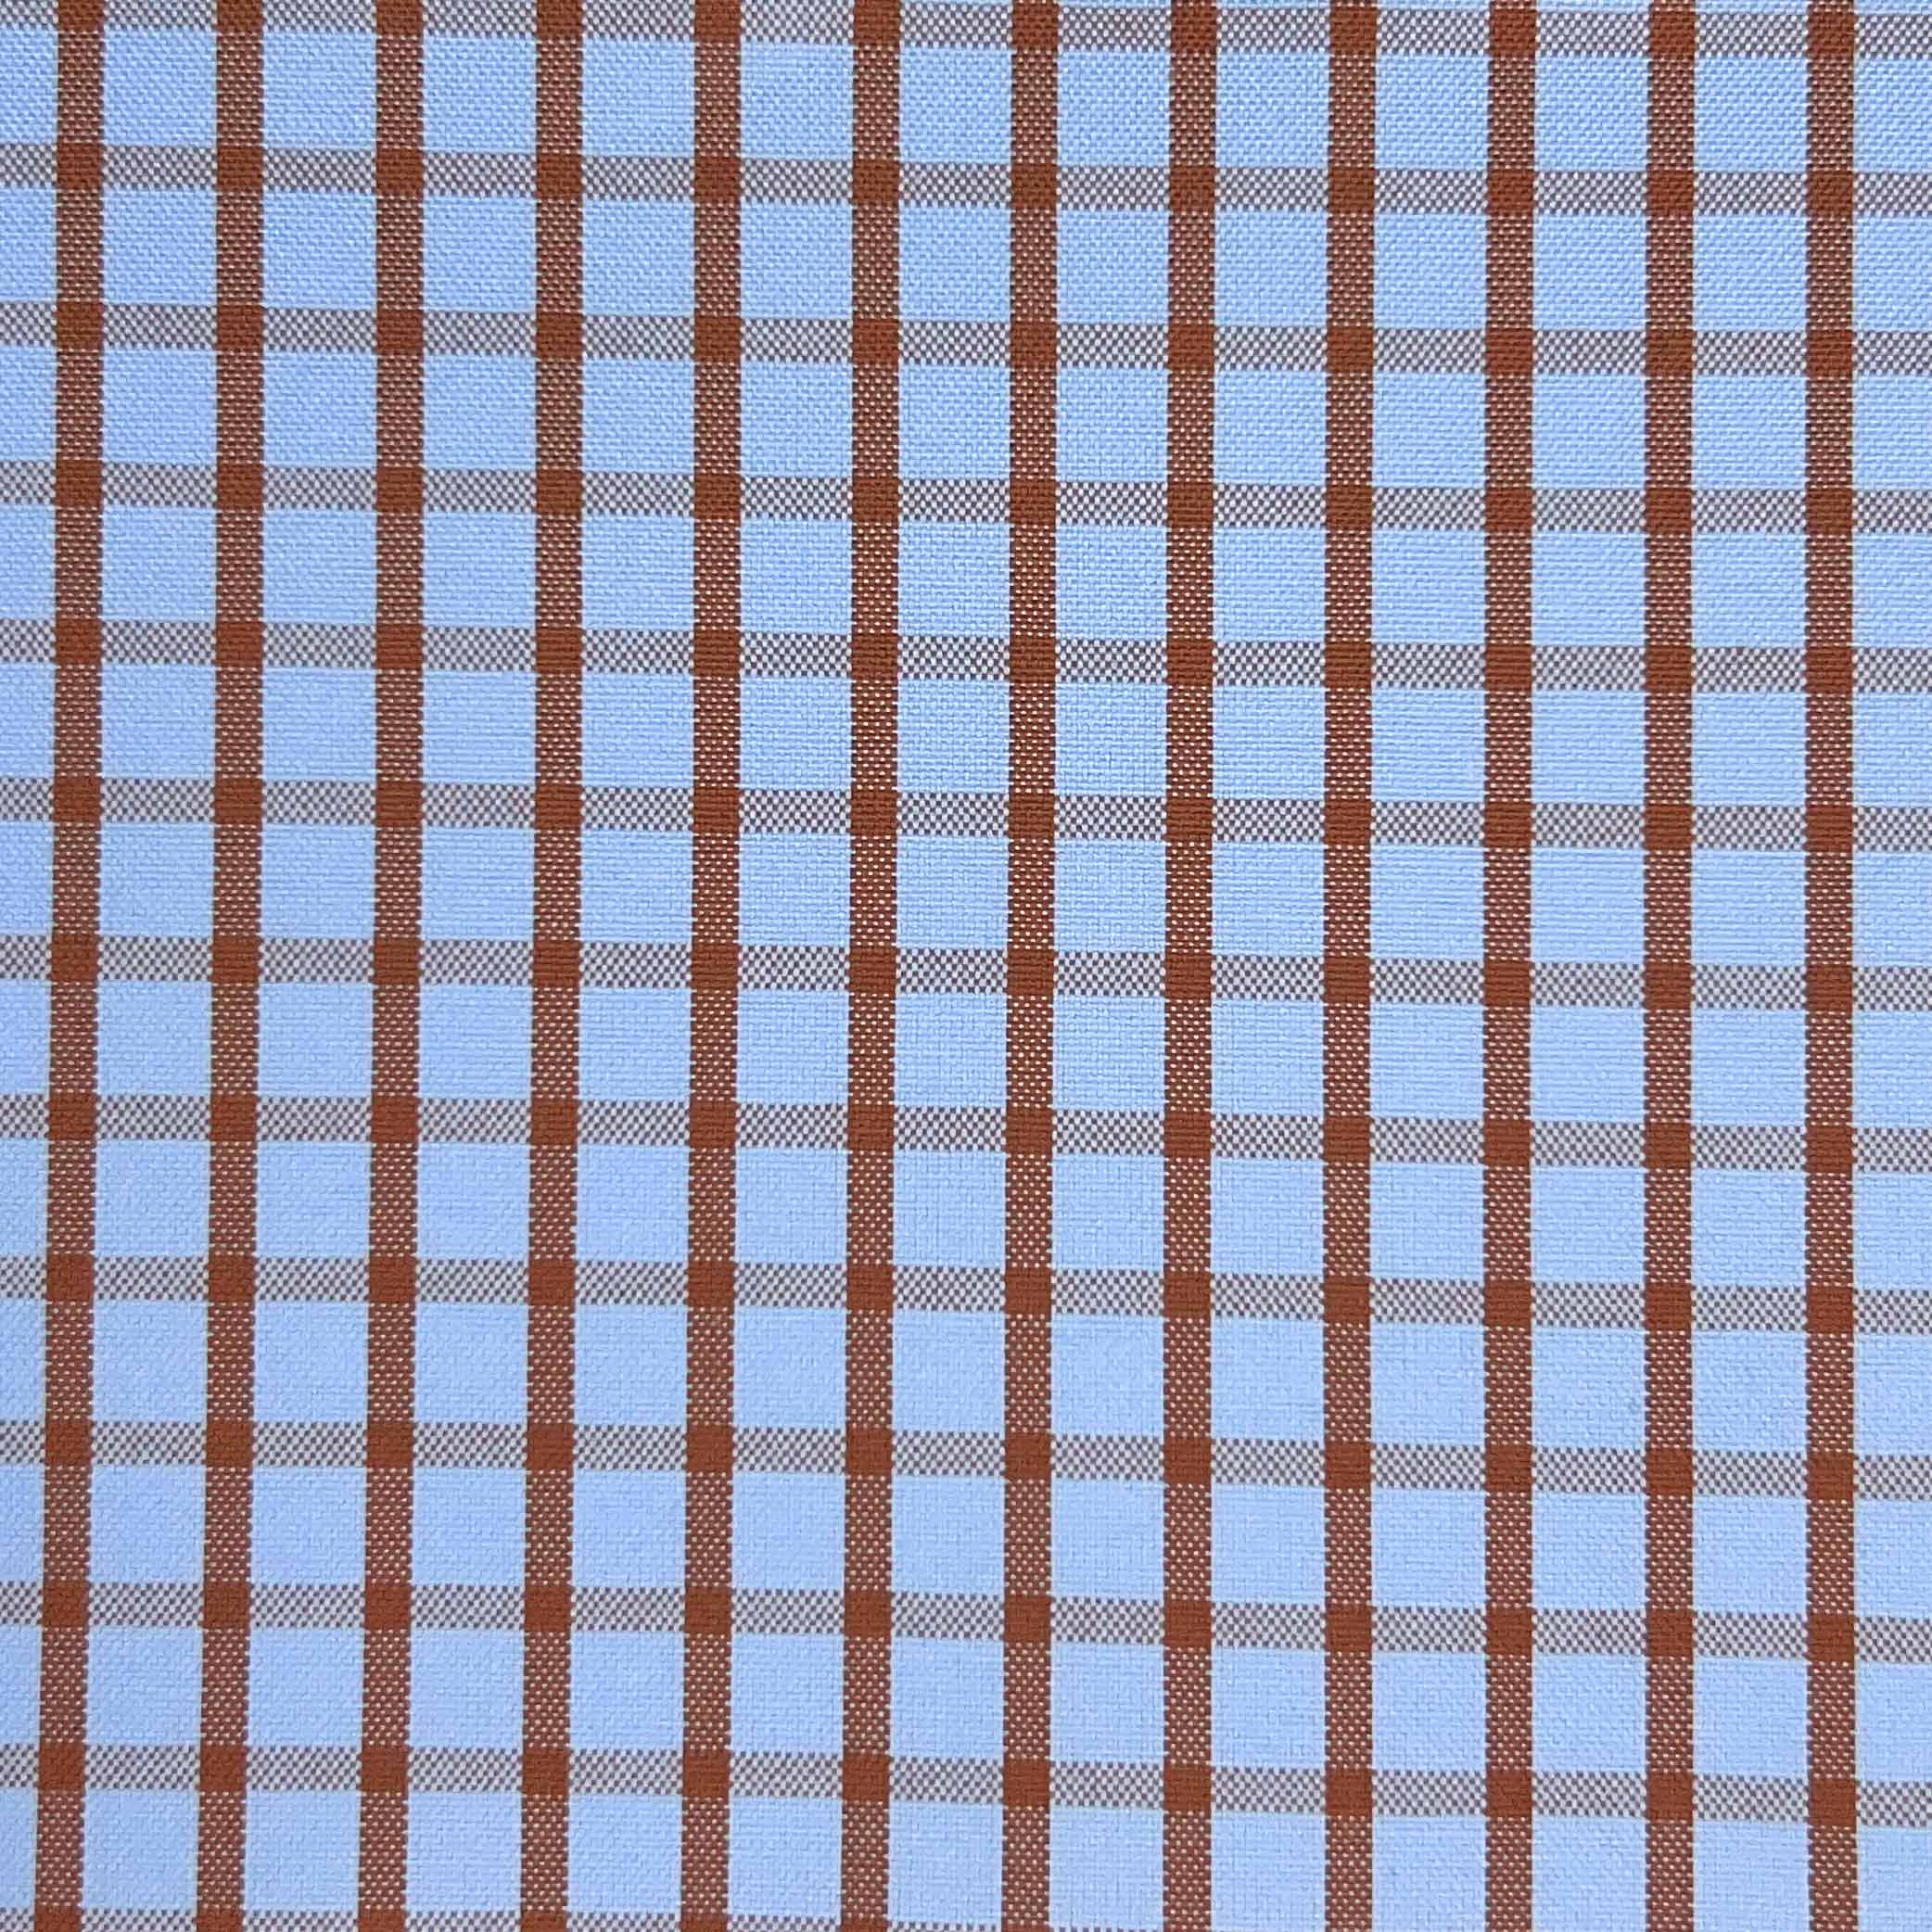 Baby Blue With Brown Grid Check Giza 45 Egyptian Cotton Dress Shirt Cloth